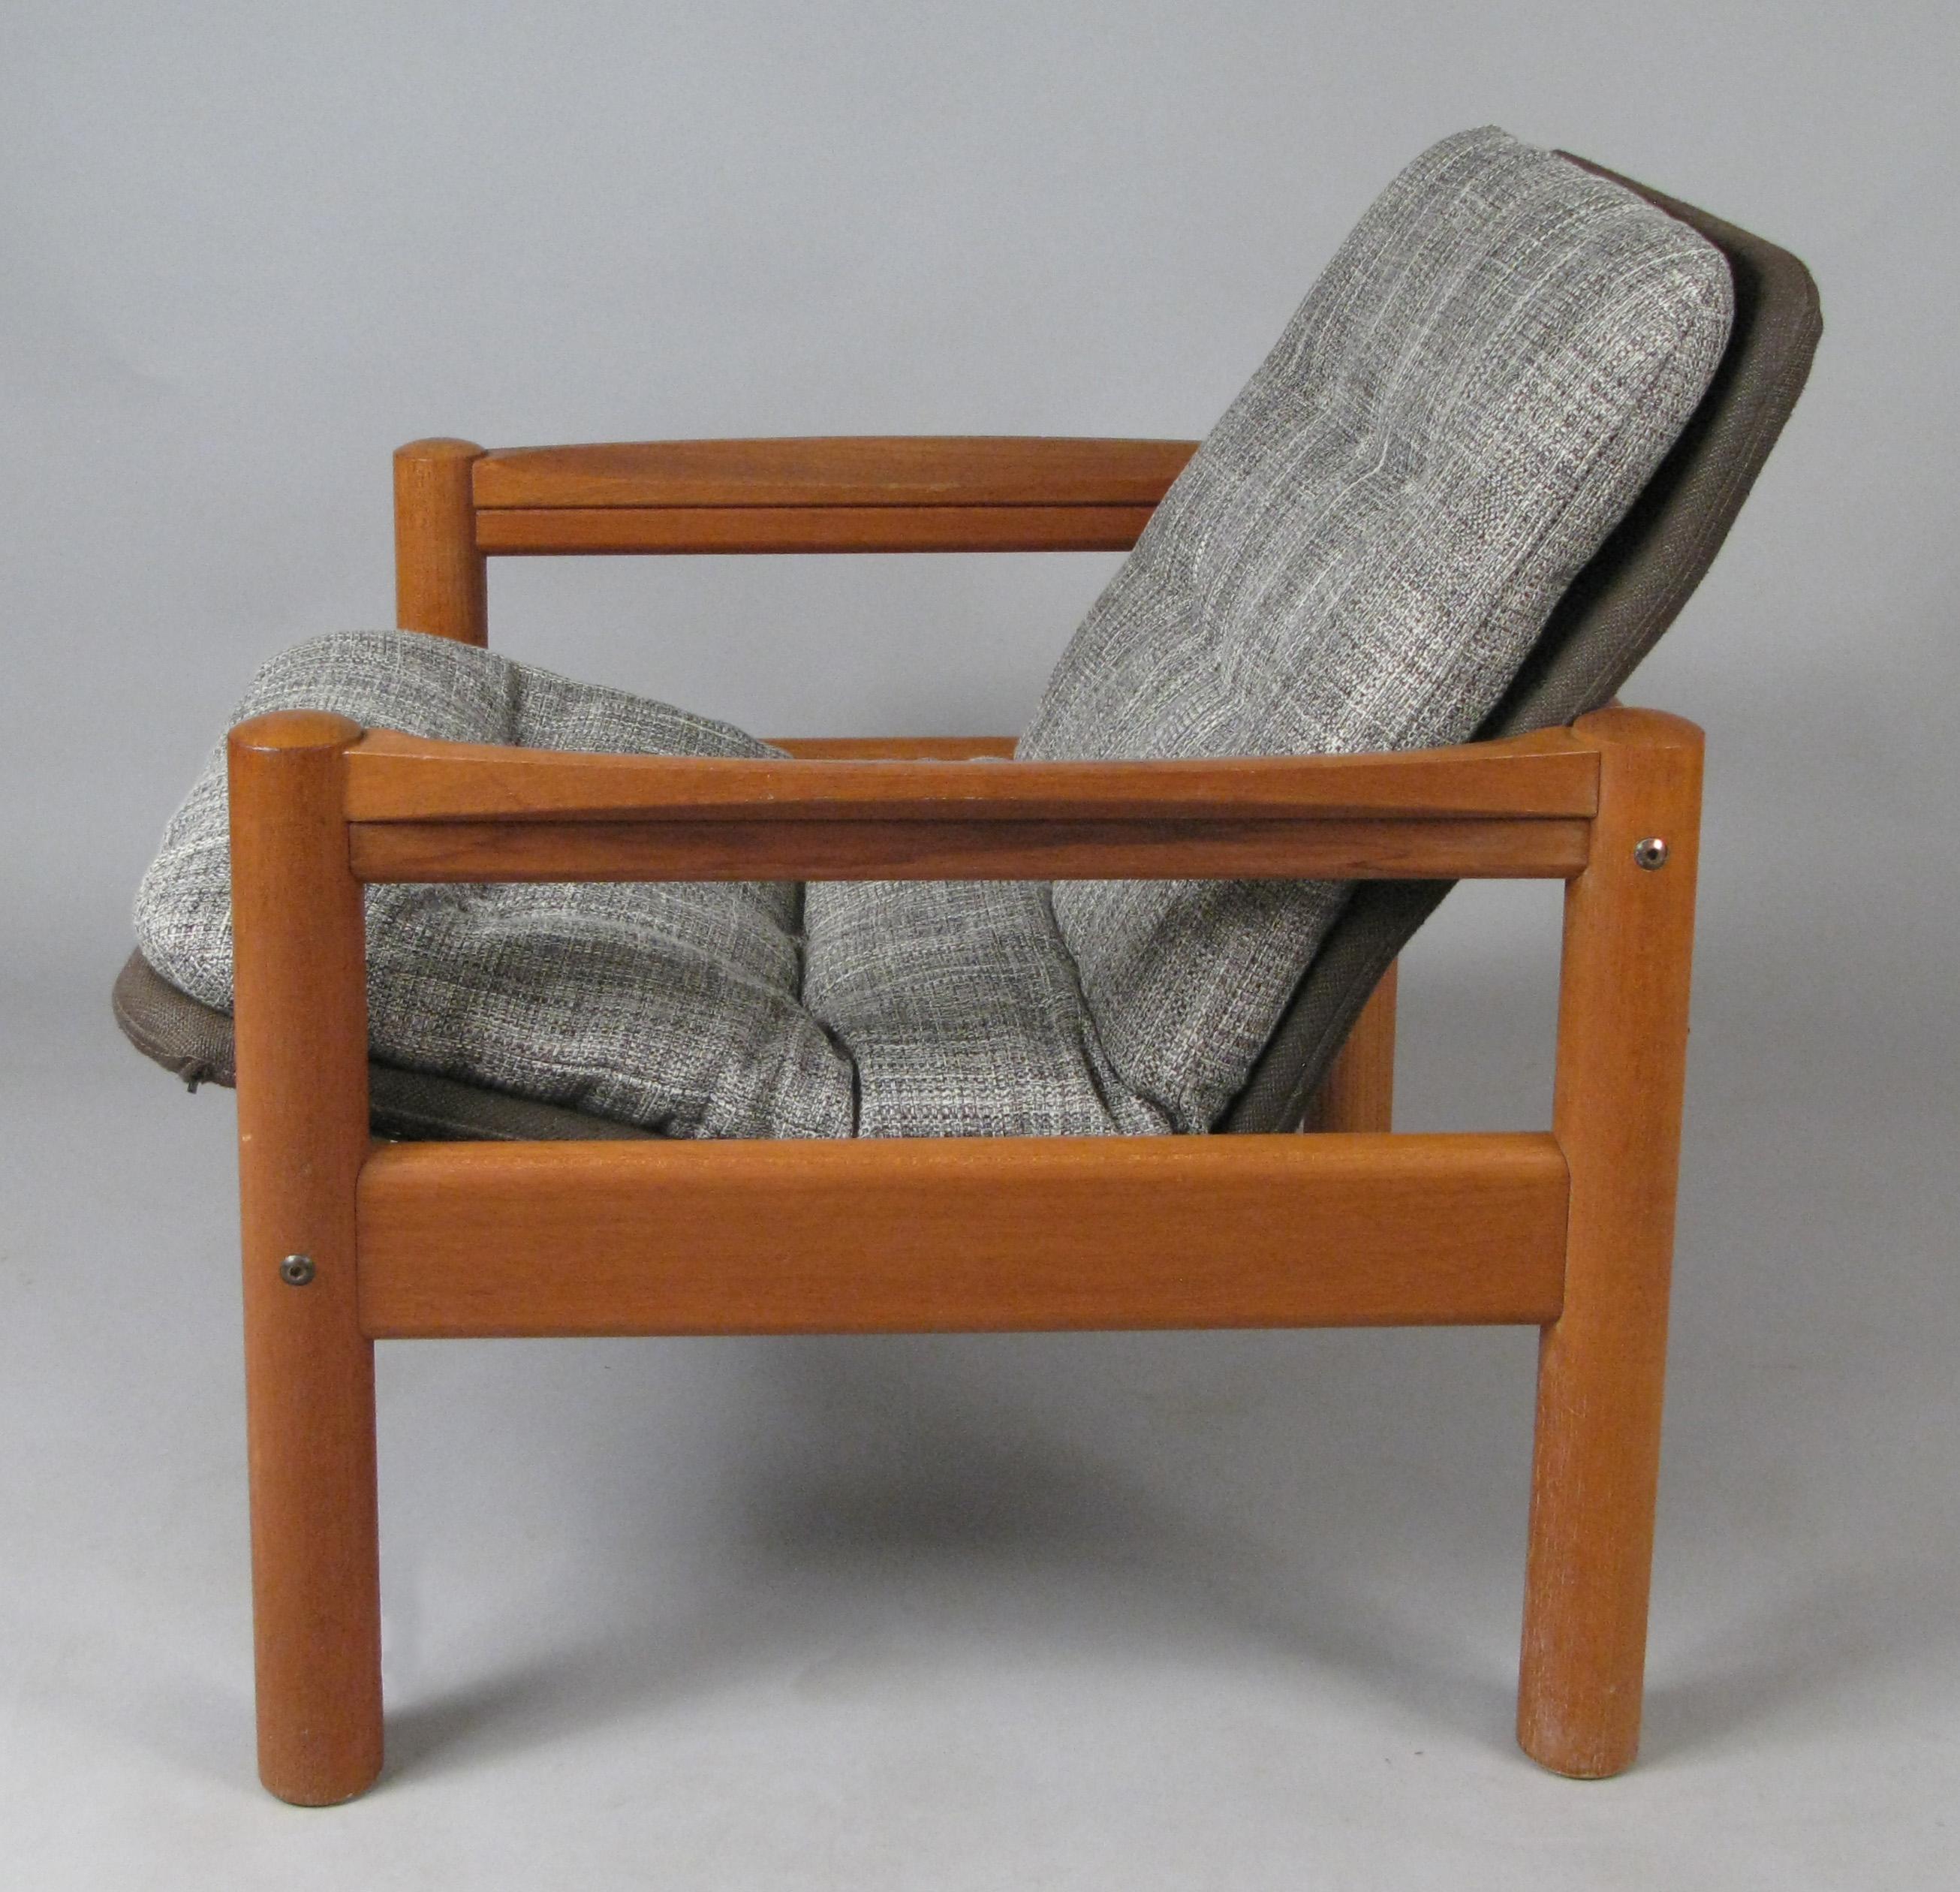 A very handsome solid teak vintage 1970s lounge chair made by Domino Møbler. With its original brown linen covered seat frames and newly upholstered button tufted seat covers in a woven grey and cream. This listing is for the lounge chair.